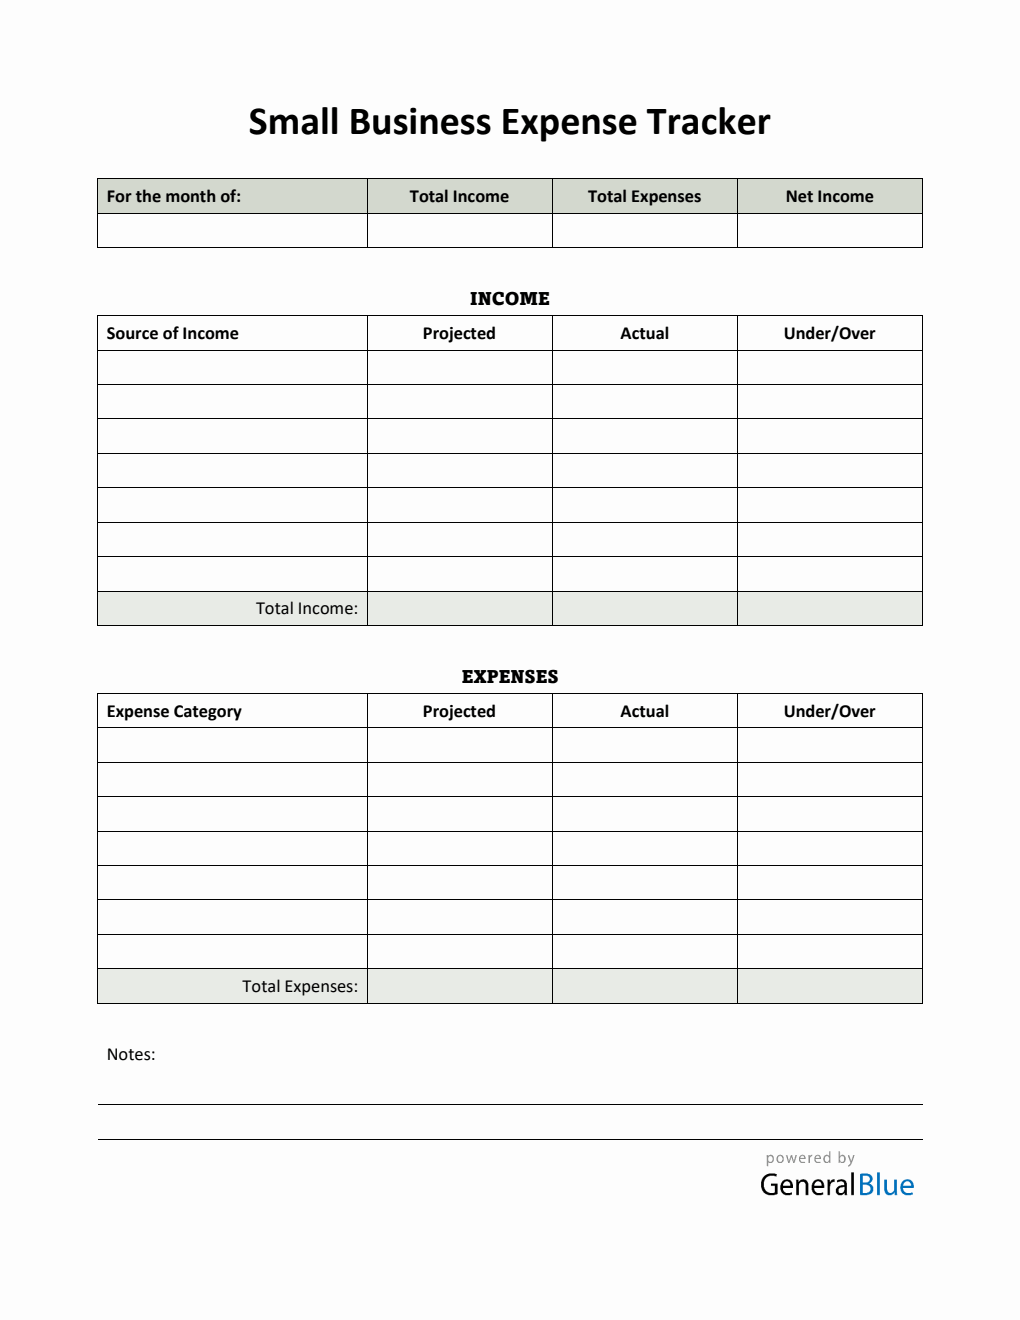 Small Business Expense Tracker in PDF (Green)